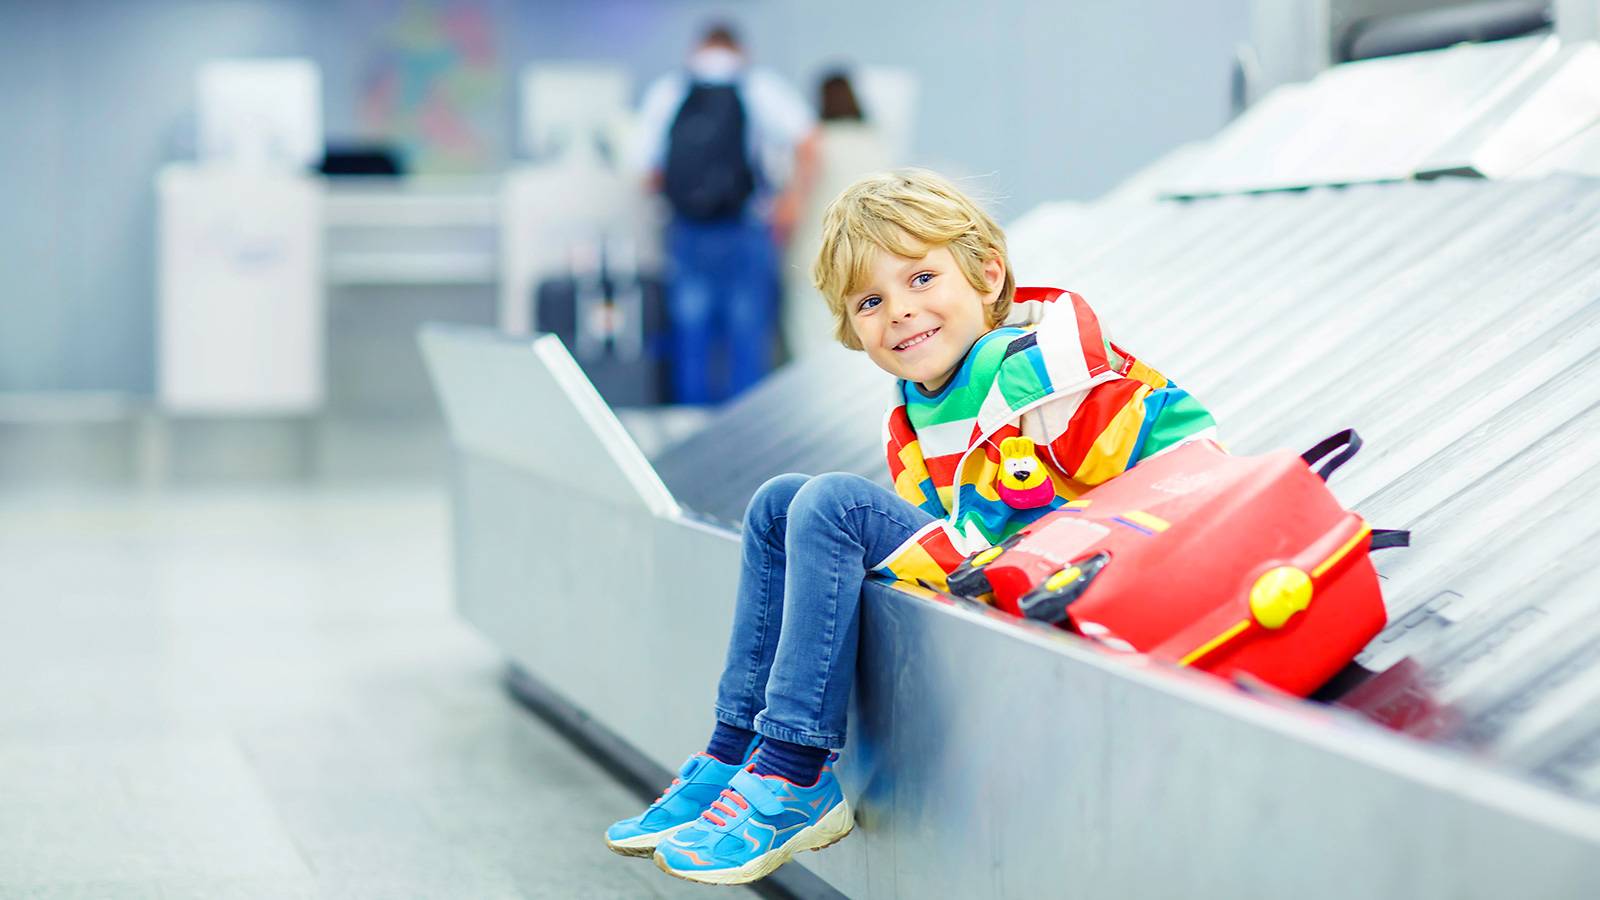 Tots-10-travel-hacks-to-survive-long-haul-flights-with-your-tot-1